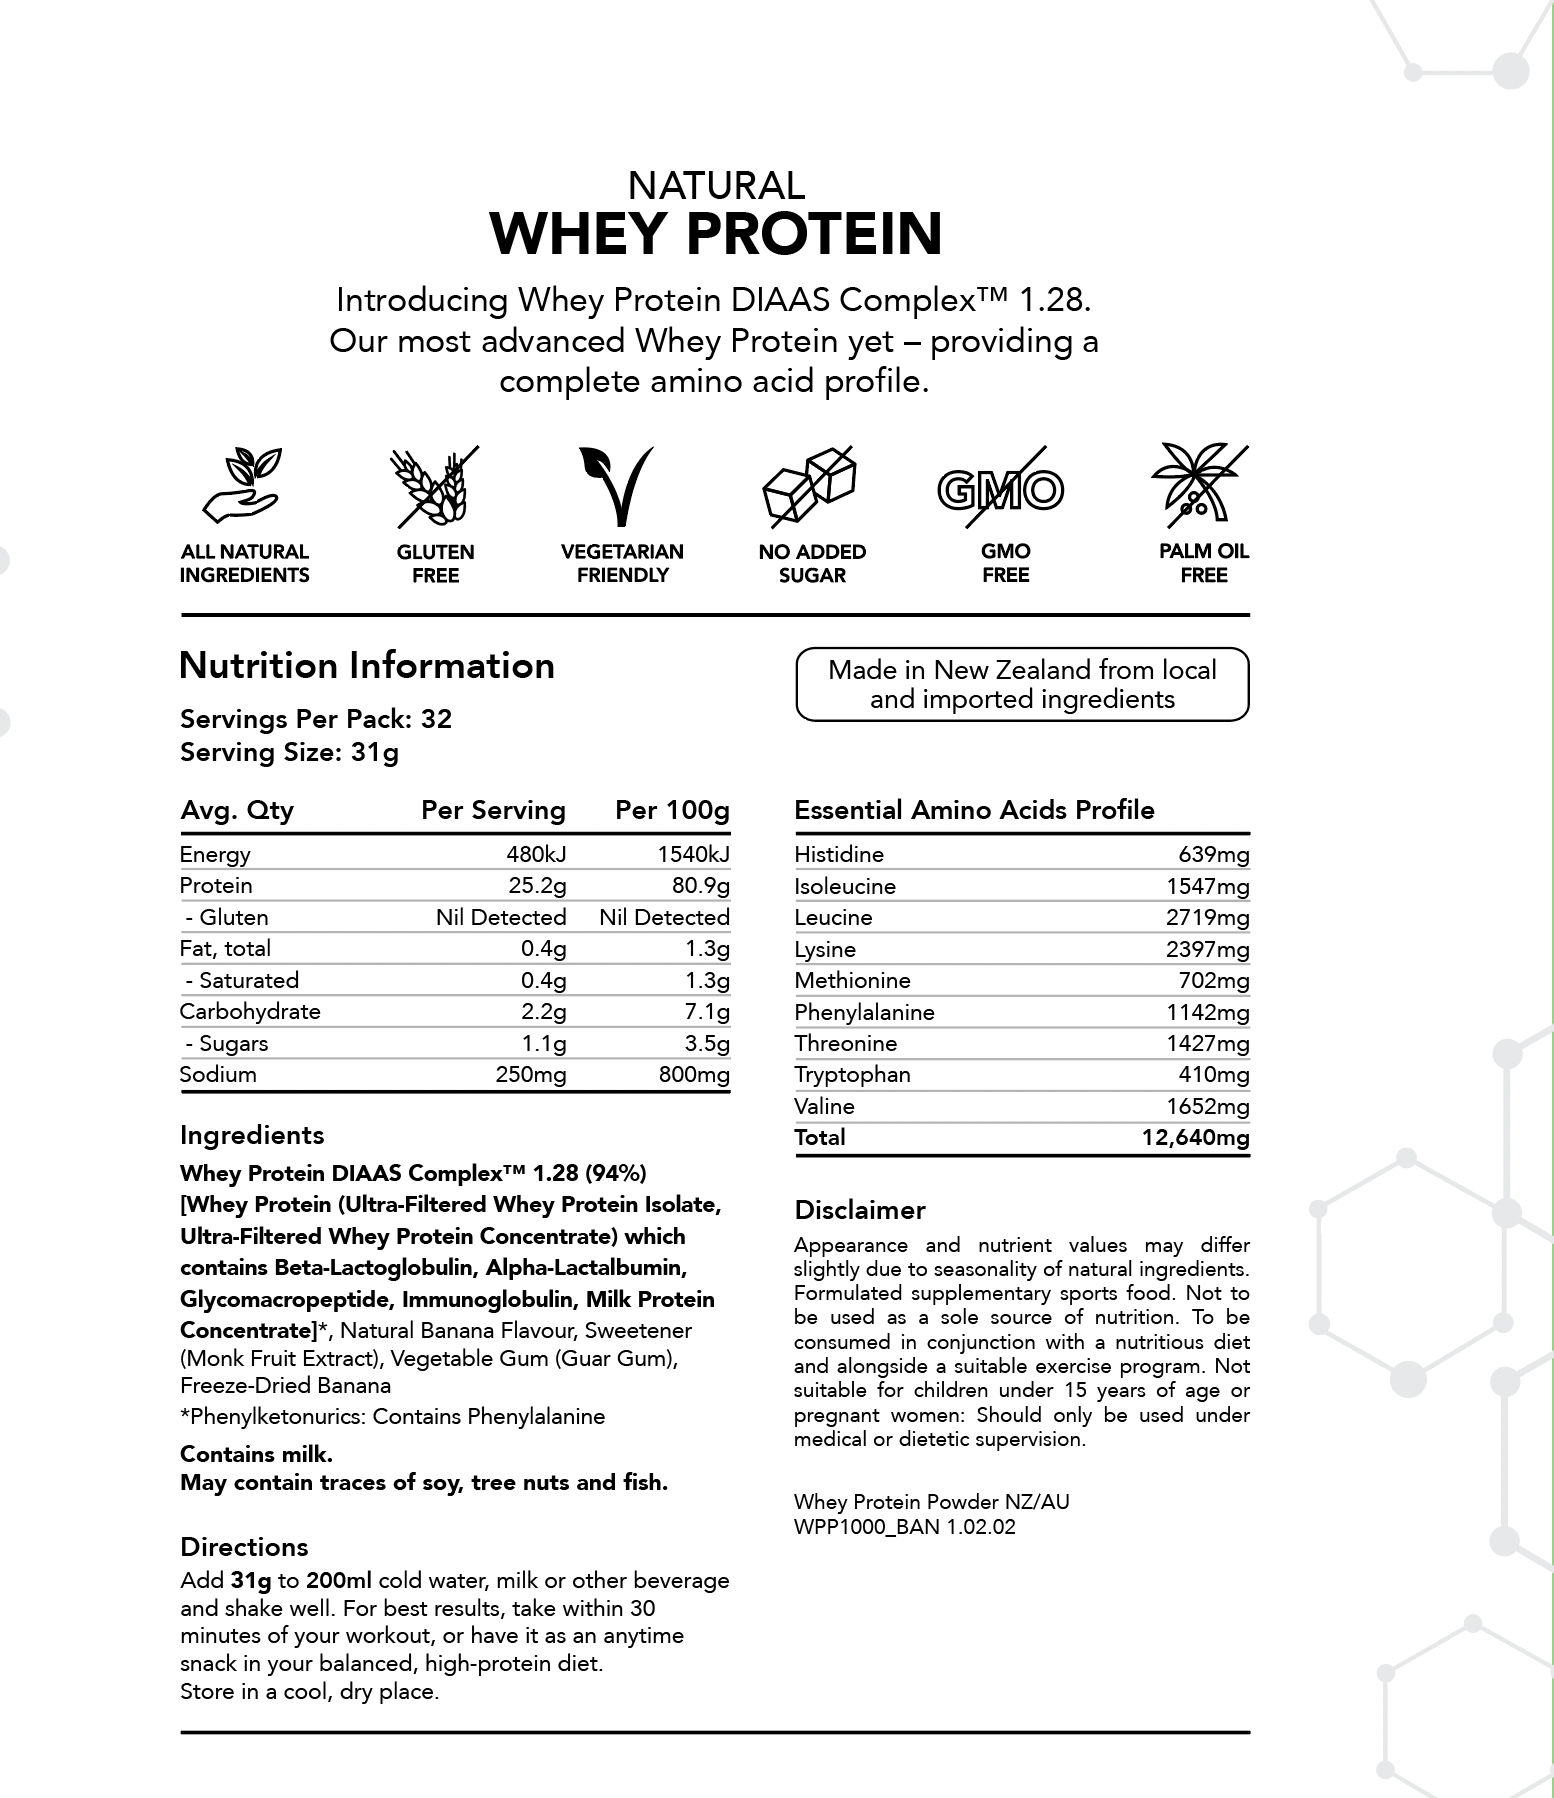 Radix Nutrition - Whey Protein DIAAS Complex™ 1.61 in banana flavour